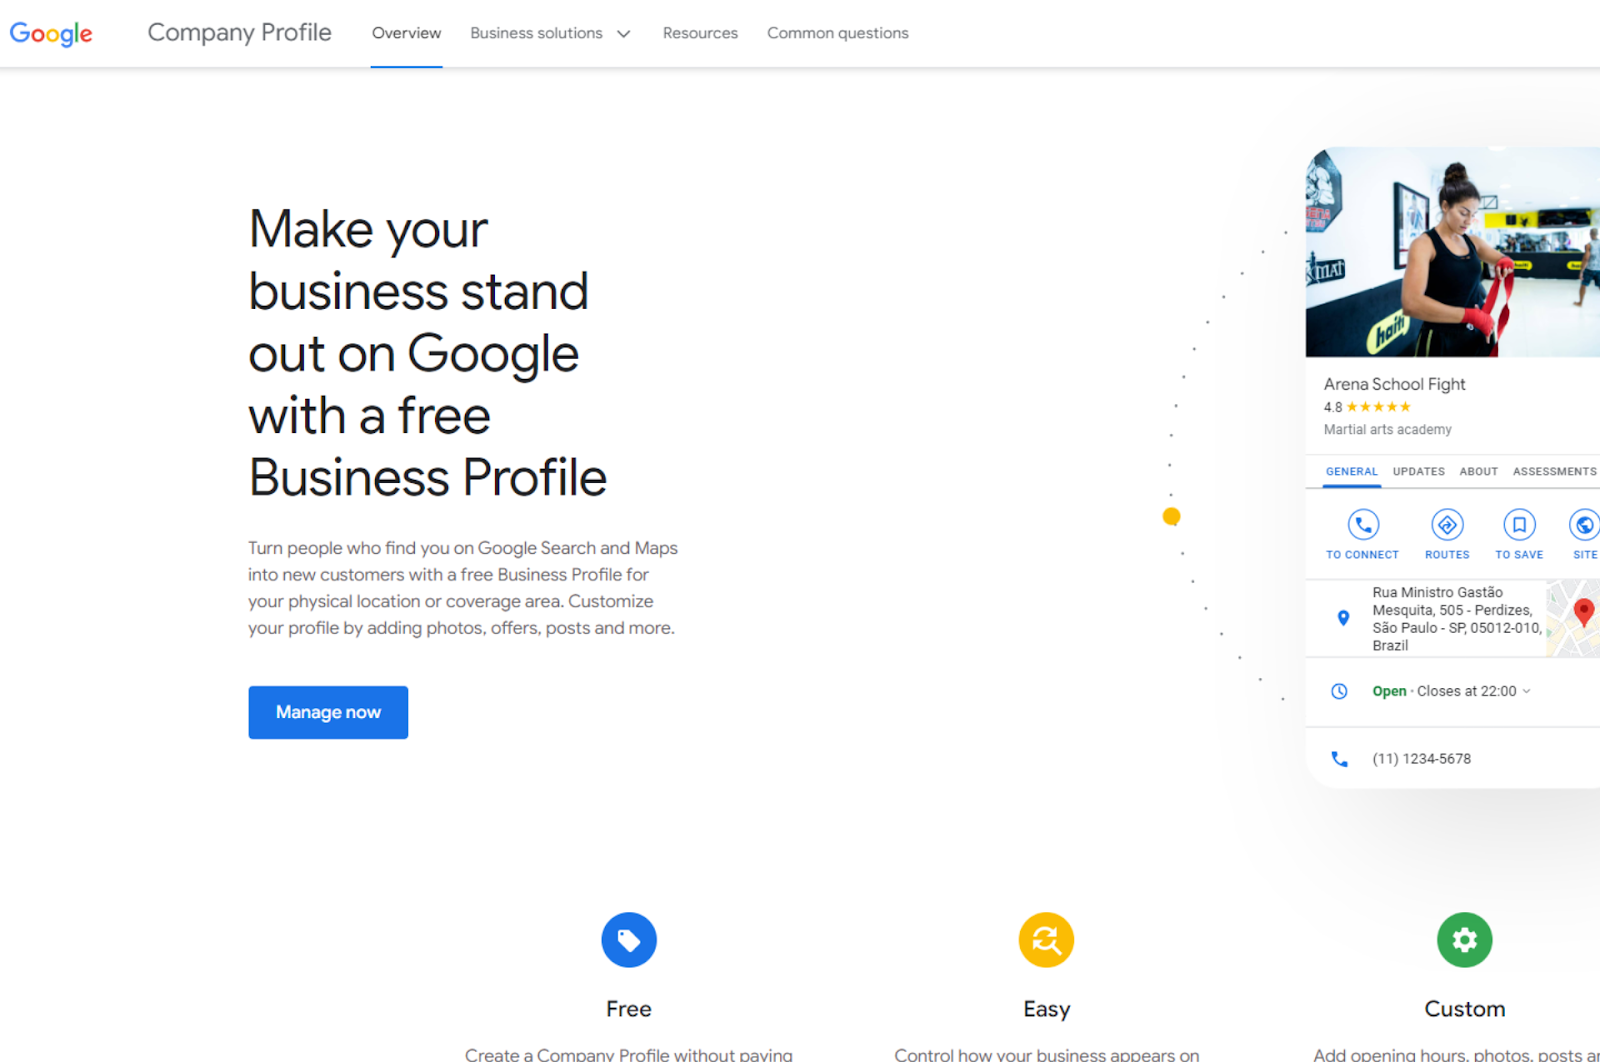 Google My Business promotion page emphasizes the benefit of a free business profile for your eCommerce on Google for SEO visibility.